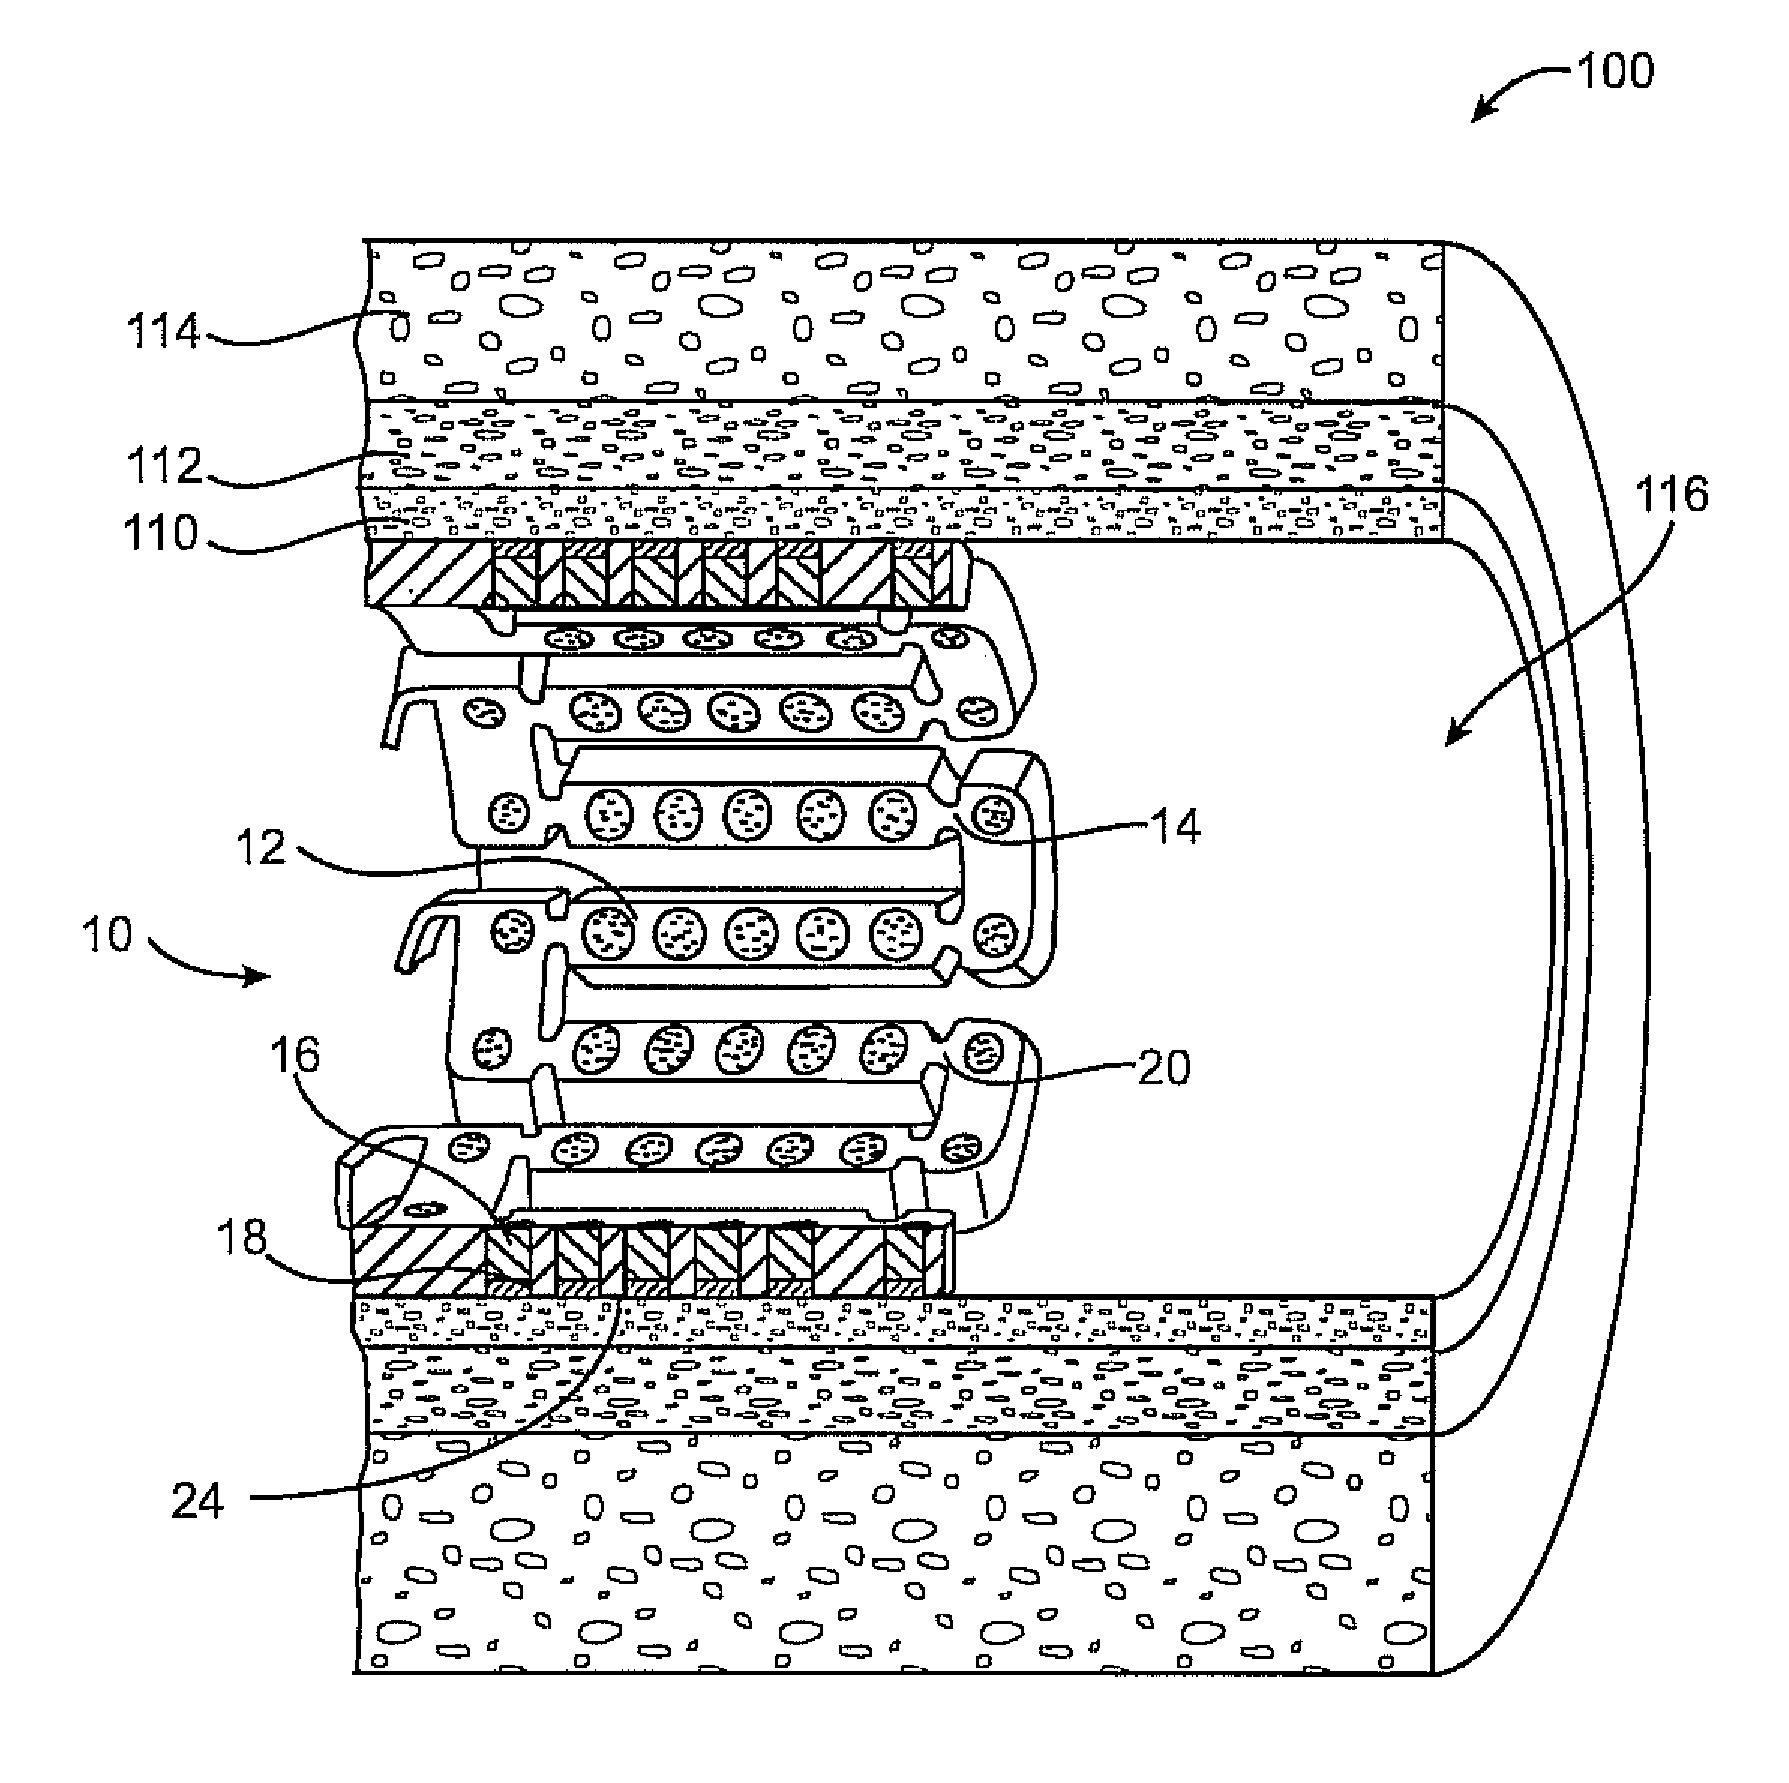 Methods and Devices for Reducing Tissue Damage After Ischemic Injury